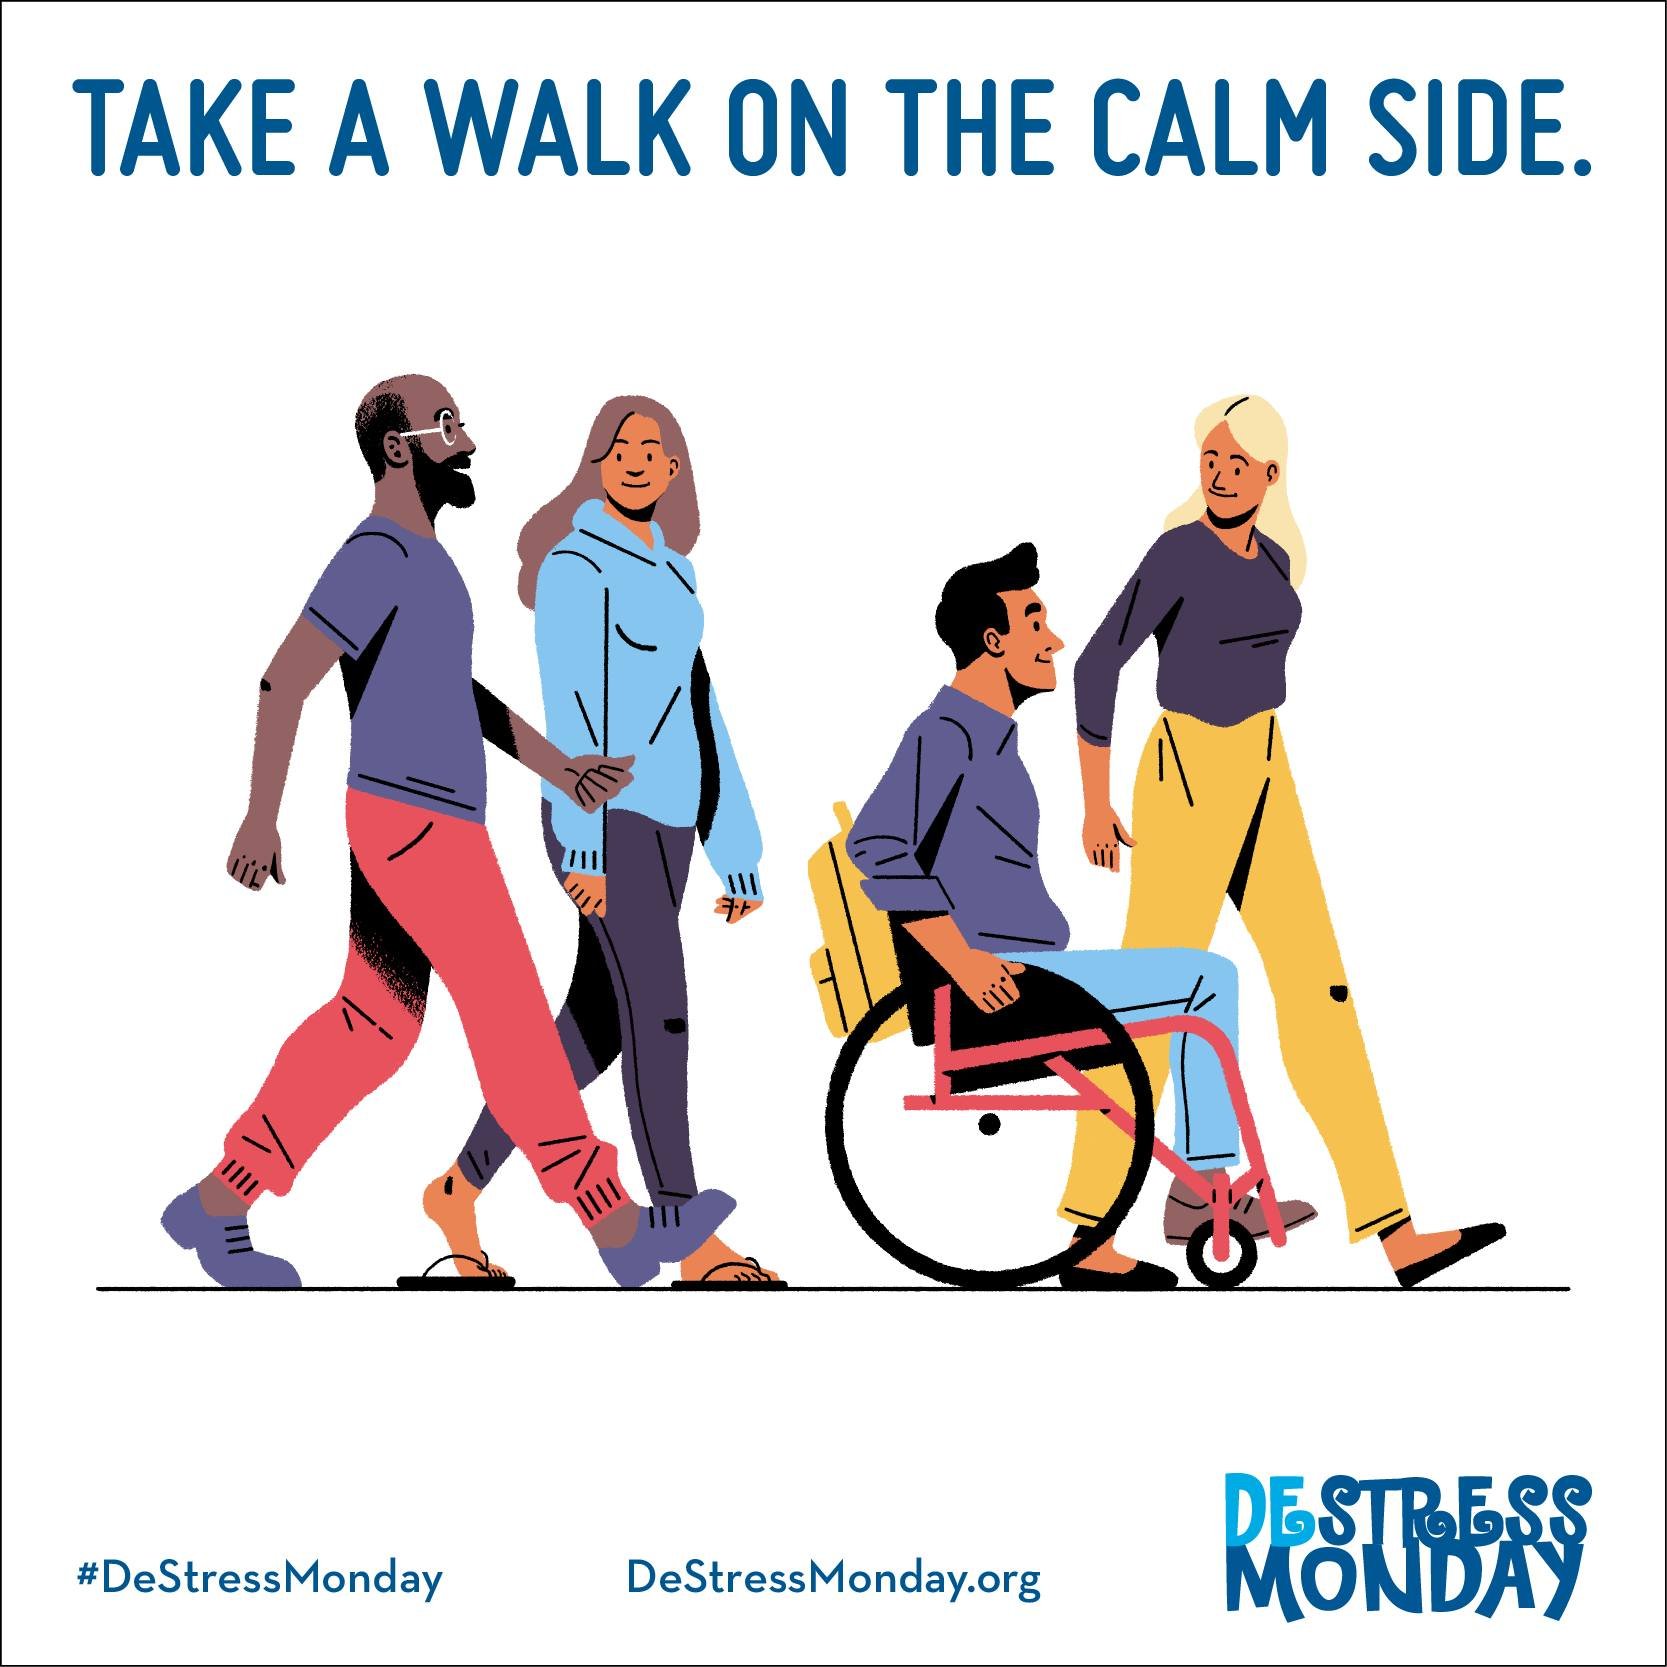 🚶 You don&rsquo;t always need heavy equipment or a gym membership to exercise. If you need to destress from work, school, or just life in general, take a walk.

To learn more about the benefits of walking, visit mondaycampaigns.org/destress-monday/t